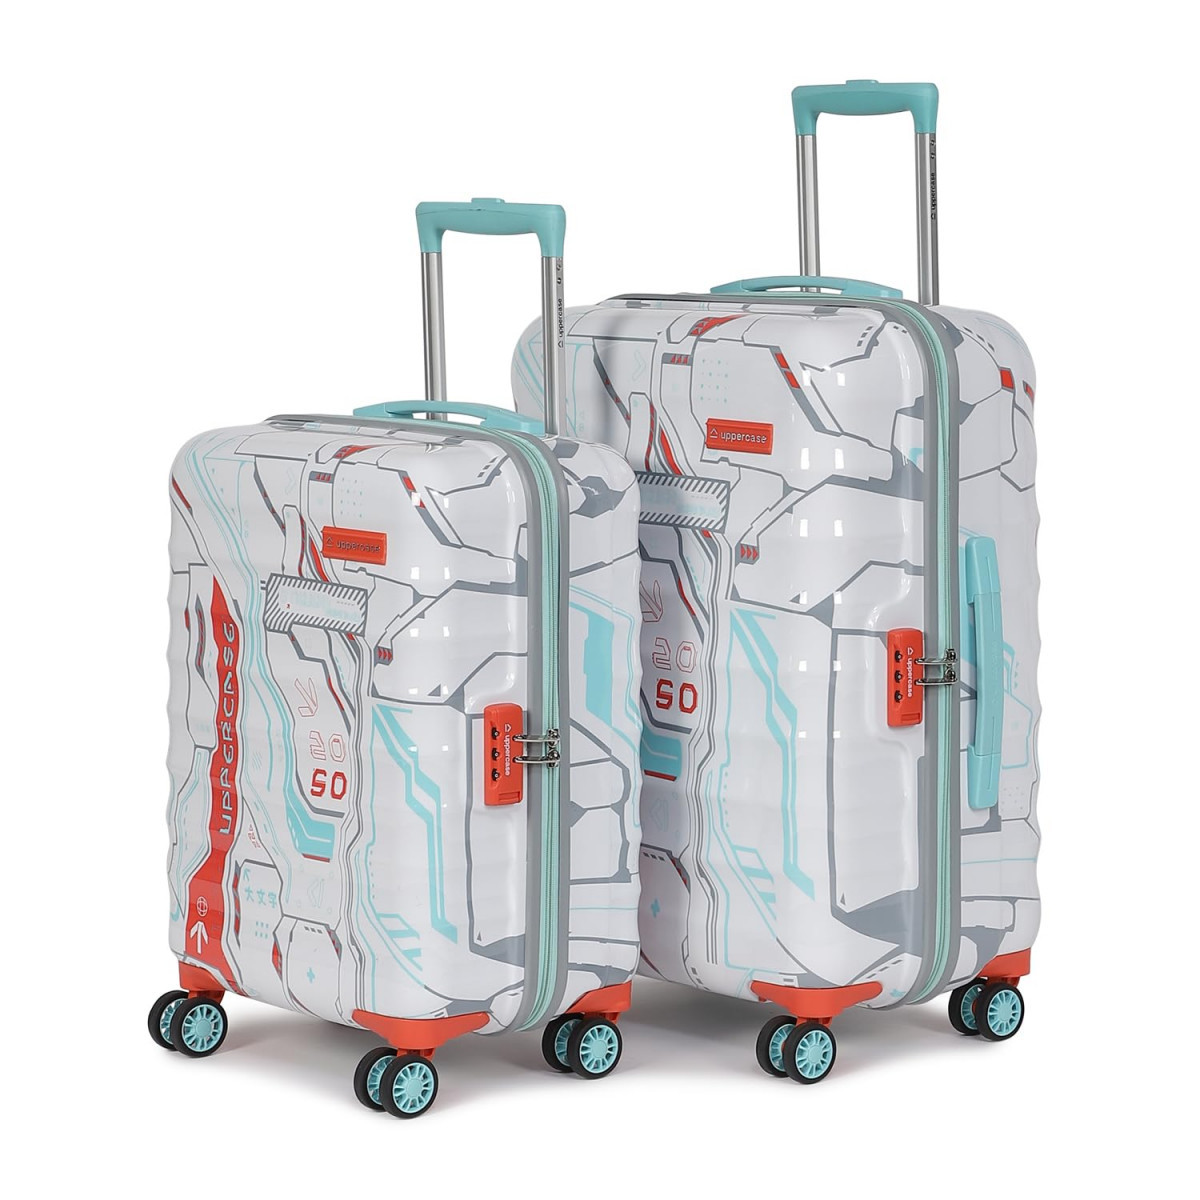 uppercase Cyber Punk Set of 2 ML Hardsided Printed Polycarbonate 8 Wheel Printed Eco Trolley Bag Travel Suitcase for Men and Women White